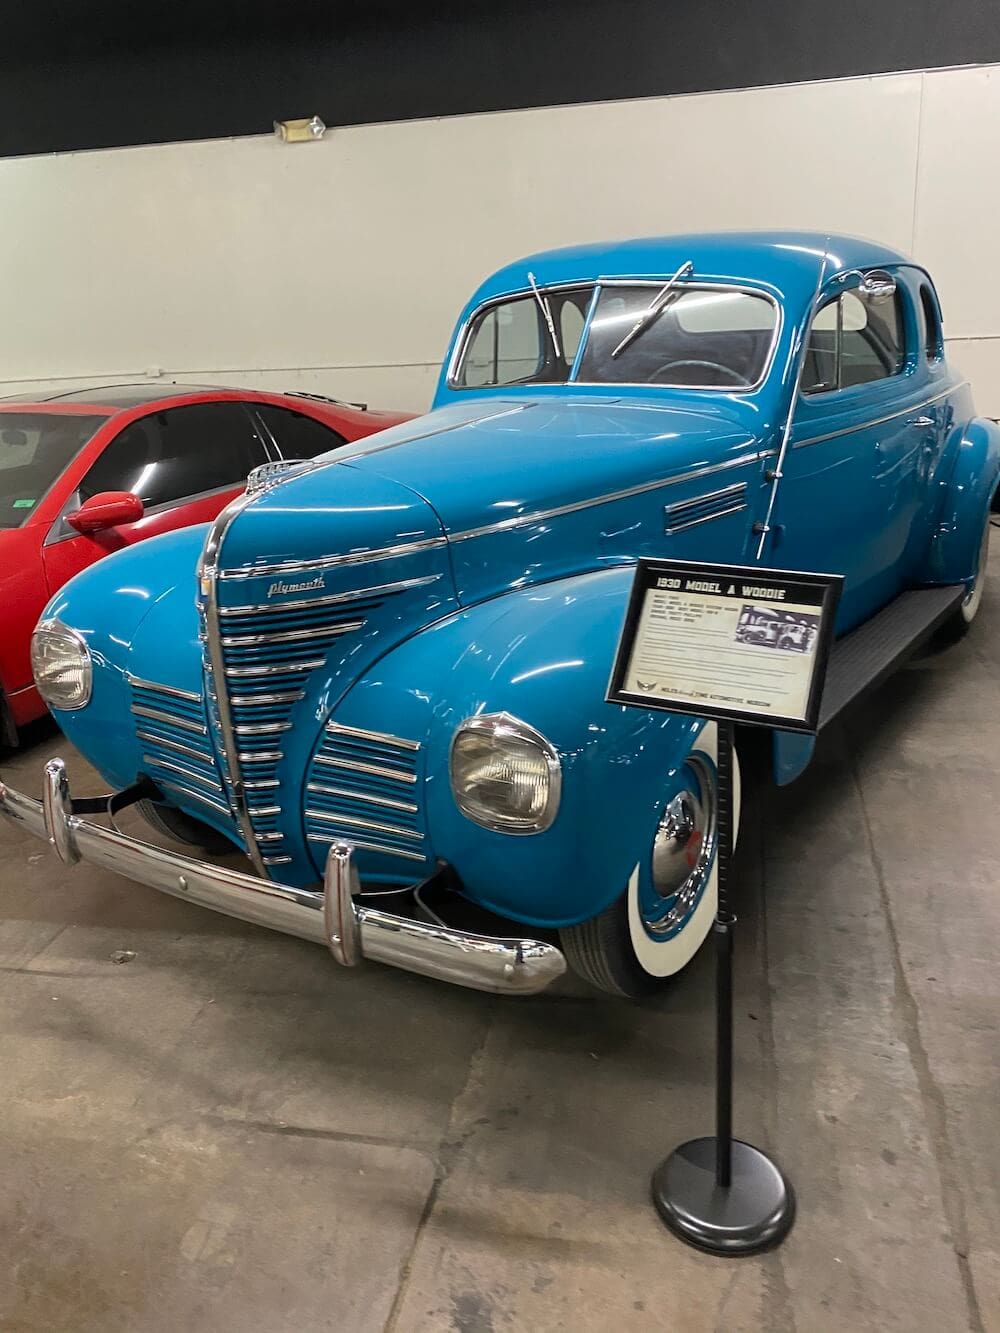 1939 Plymouth Coupe - Miles Through Time